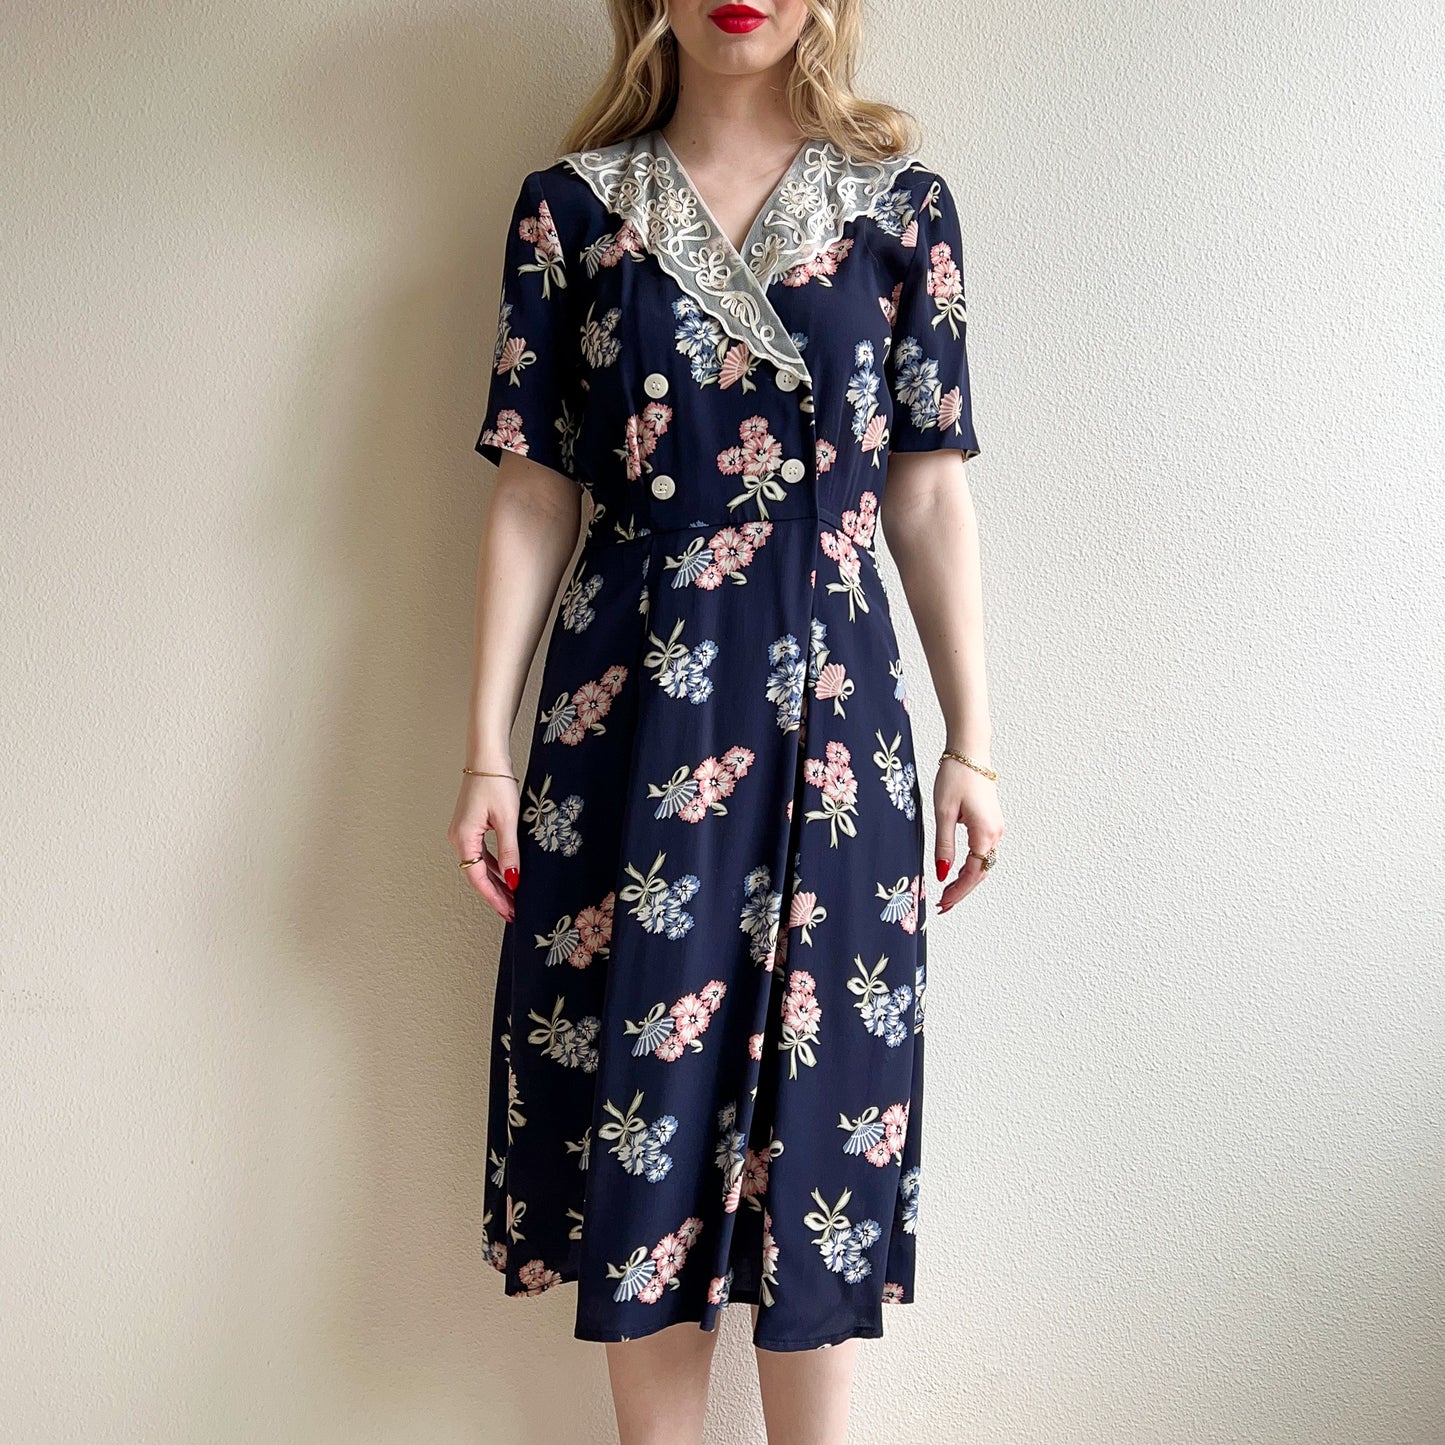 1980s-Does-1930s Double Breasted Navy Floral Dress (M)